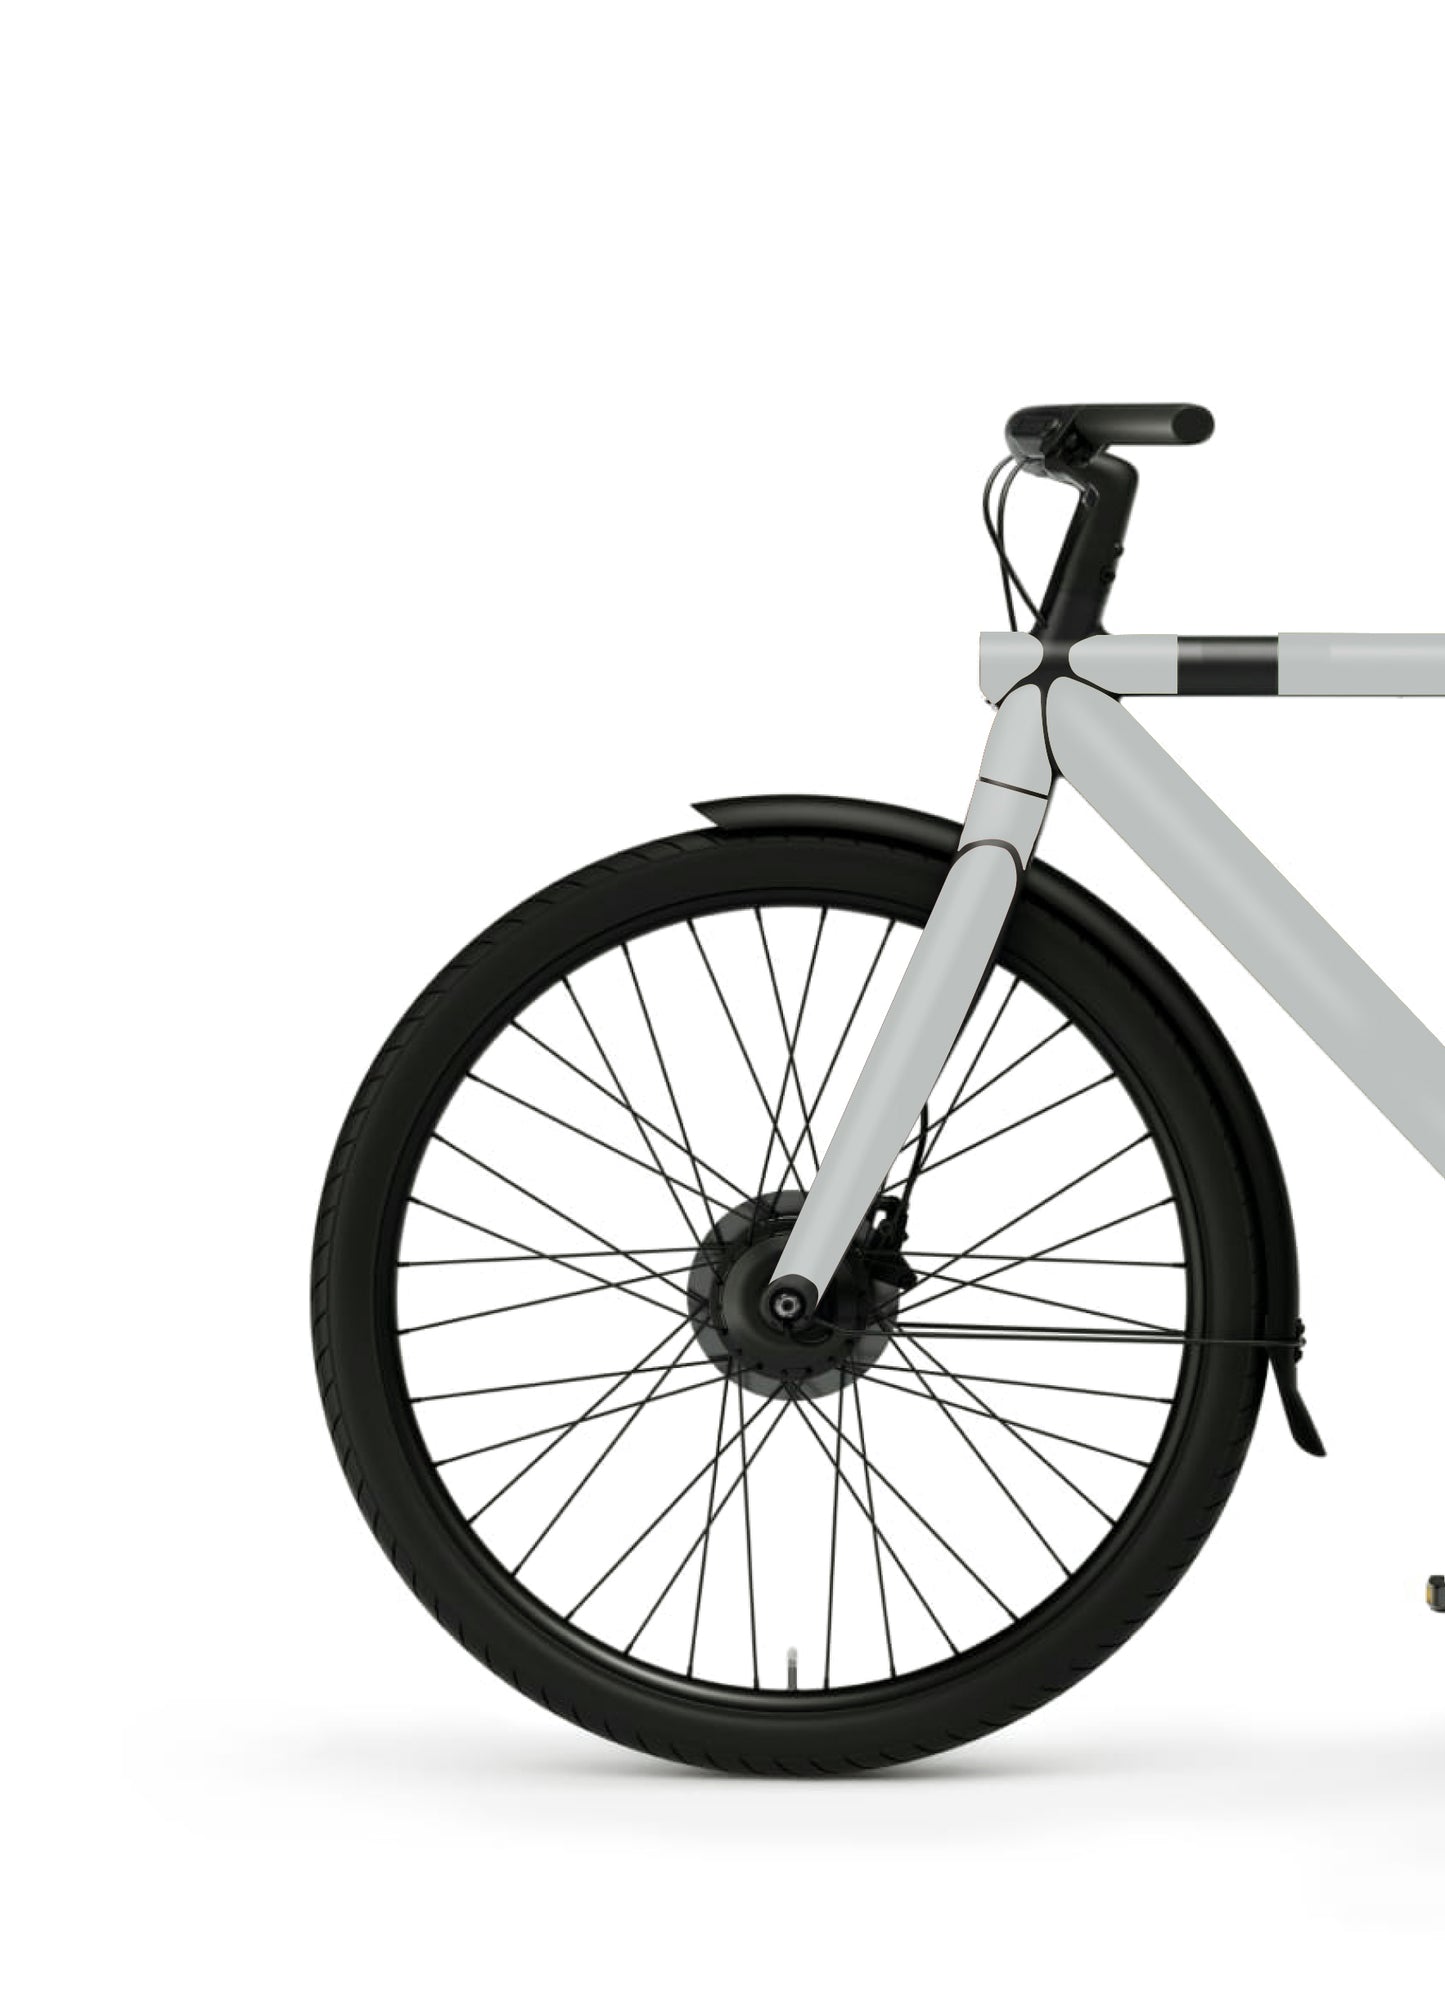 LIGHT GREY PROTECT KIT FOR VANMOOF S2/S3